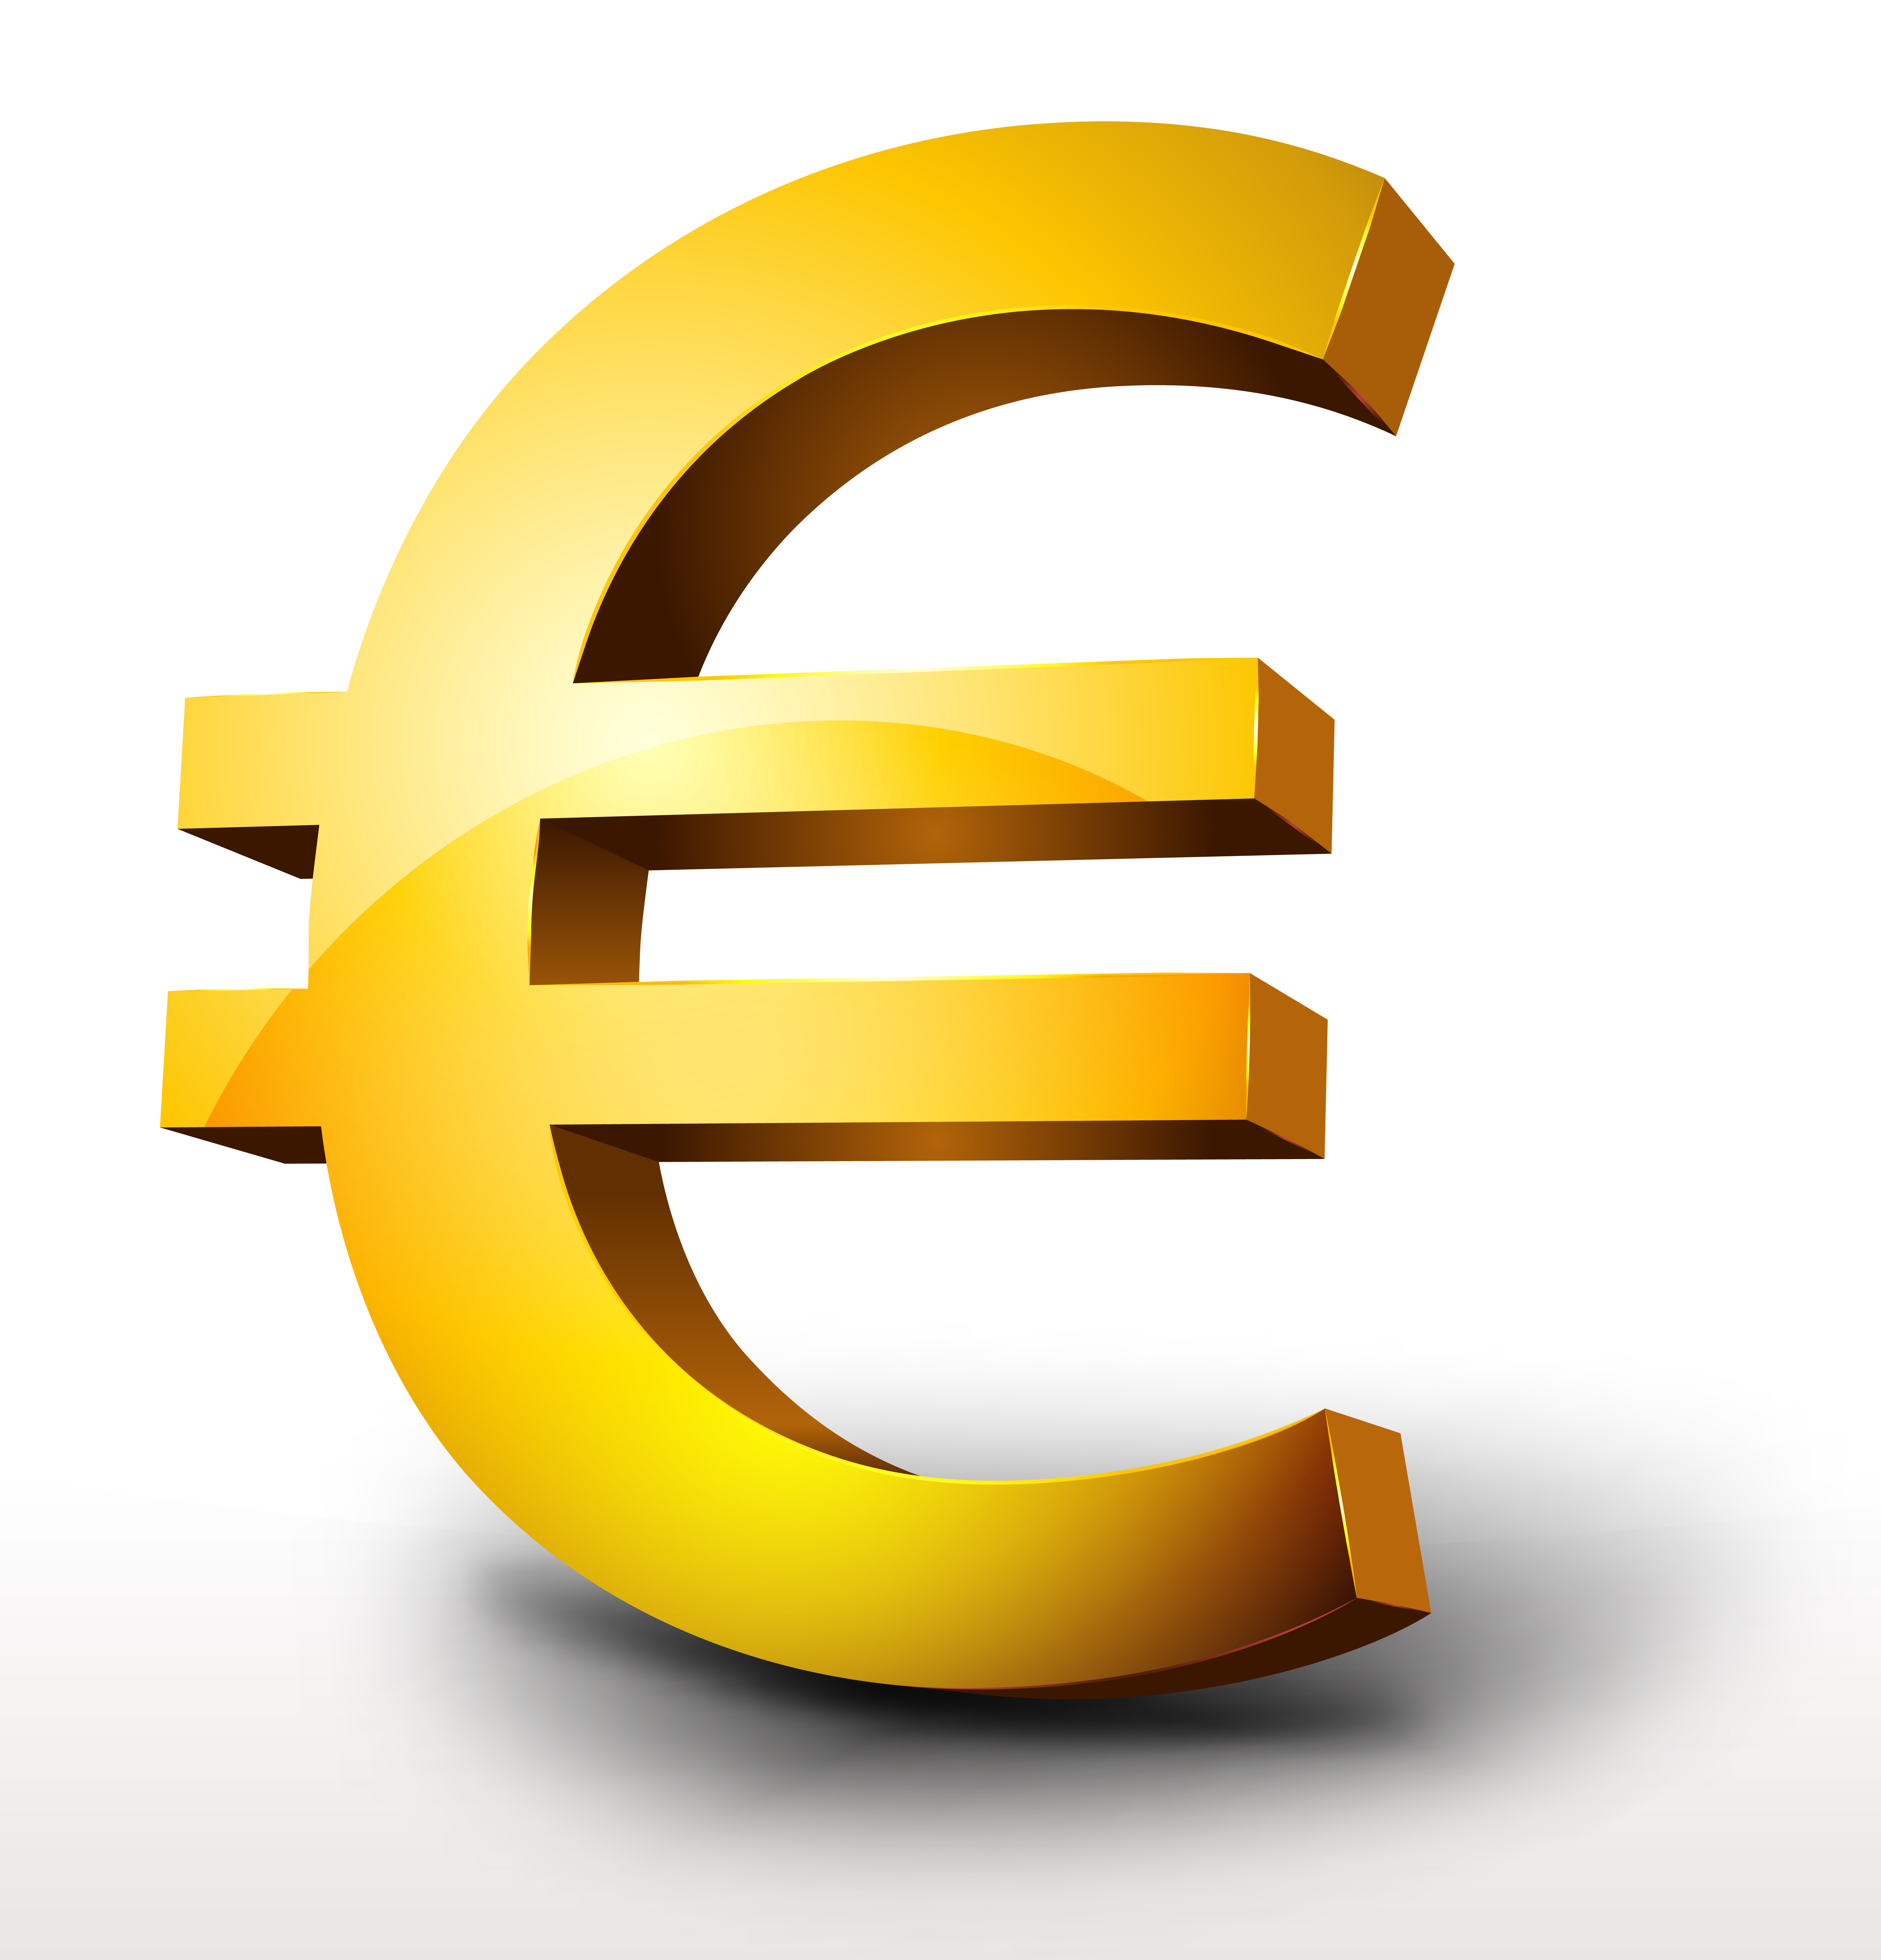 Gold Euro Currency 261104 - Download Free Vectors, Clipart ...